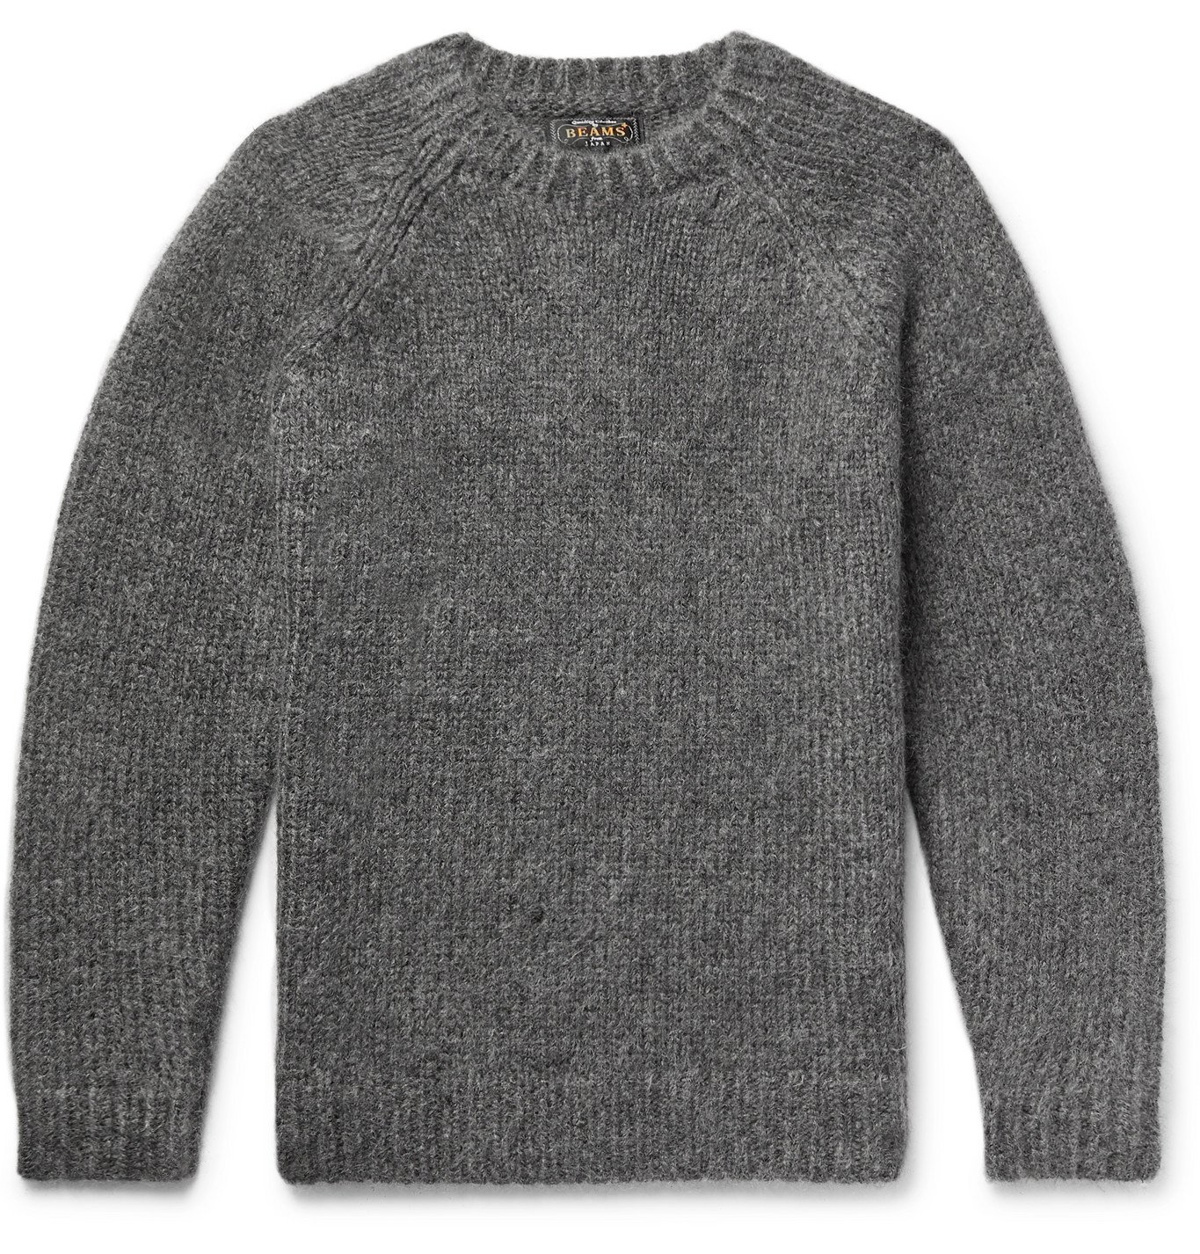 Beams Plus - Brushed Knitted Sweater - Gray Beams Plus